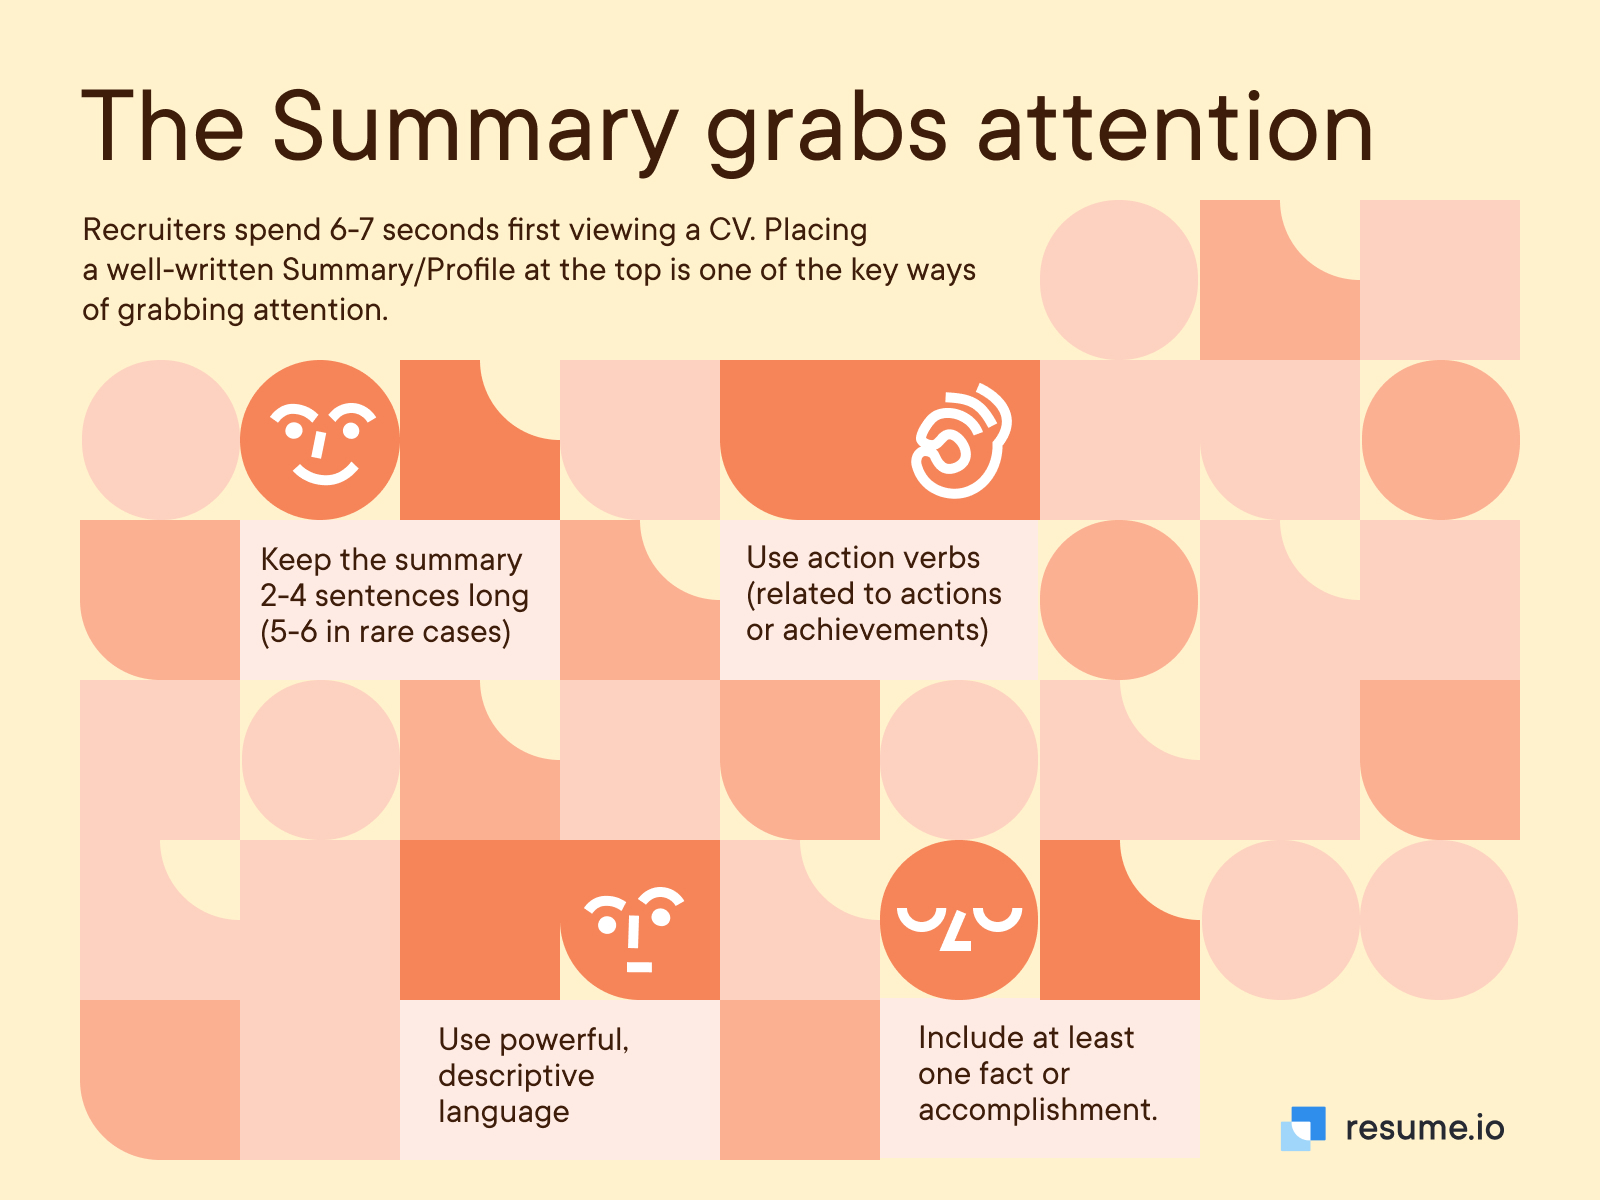 How to grab attention with your summary